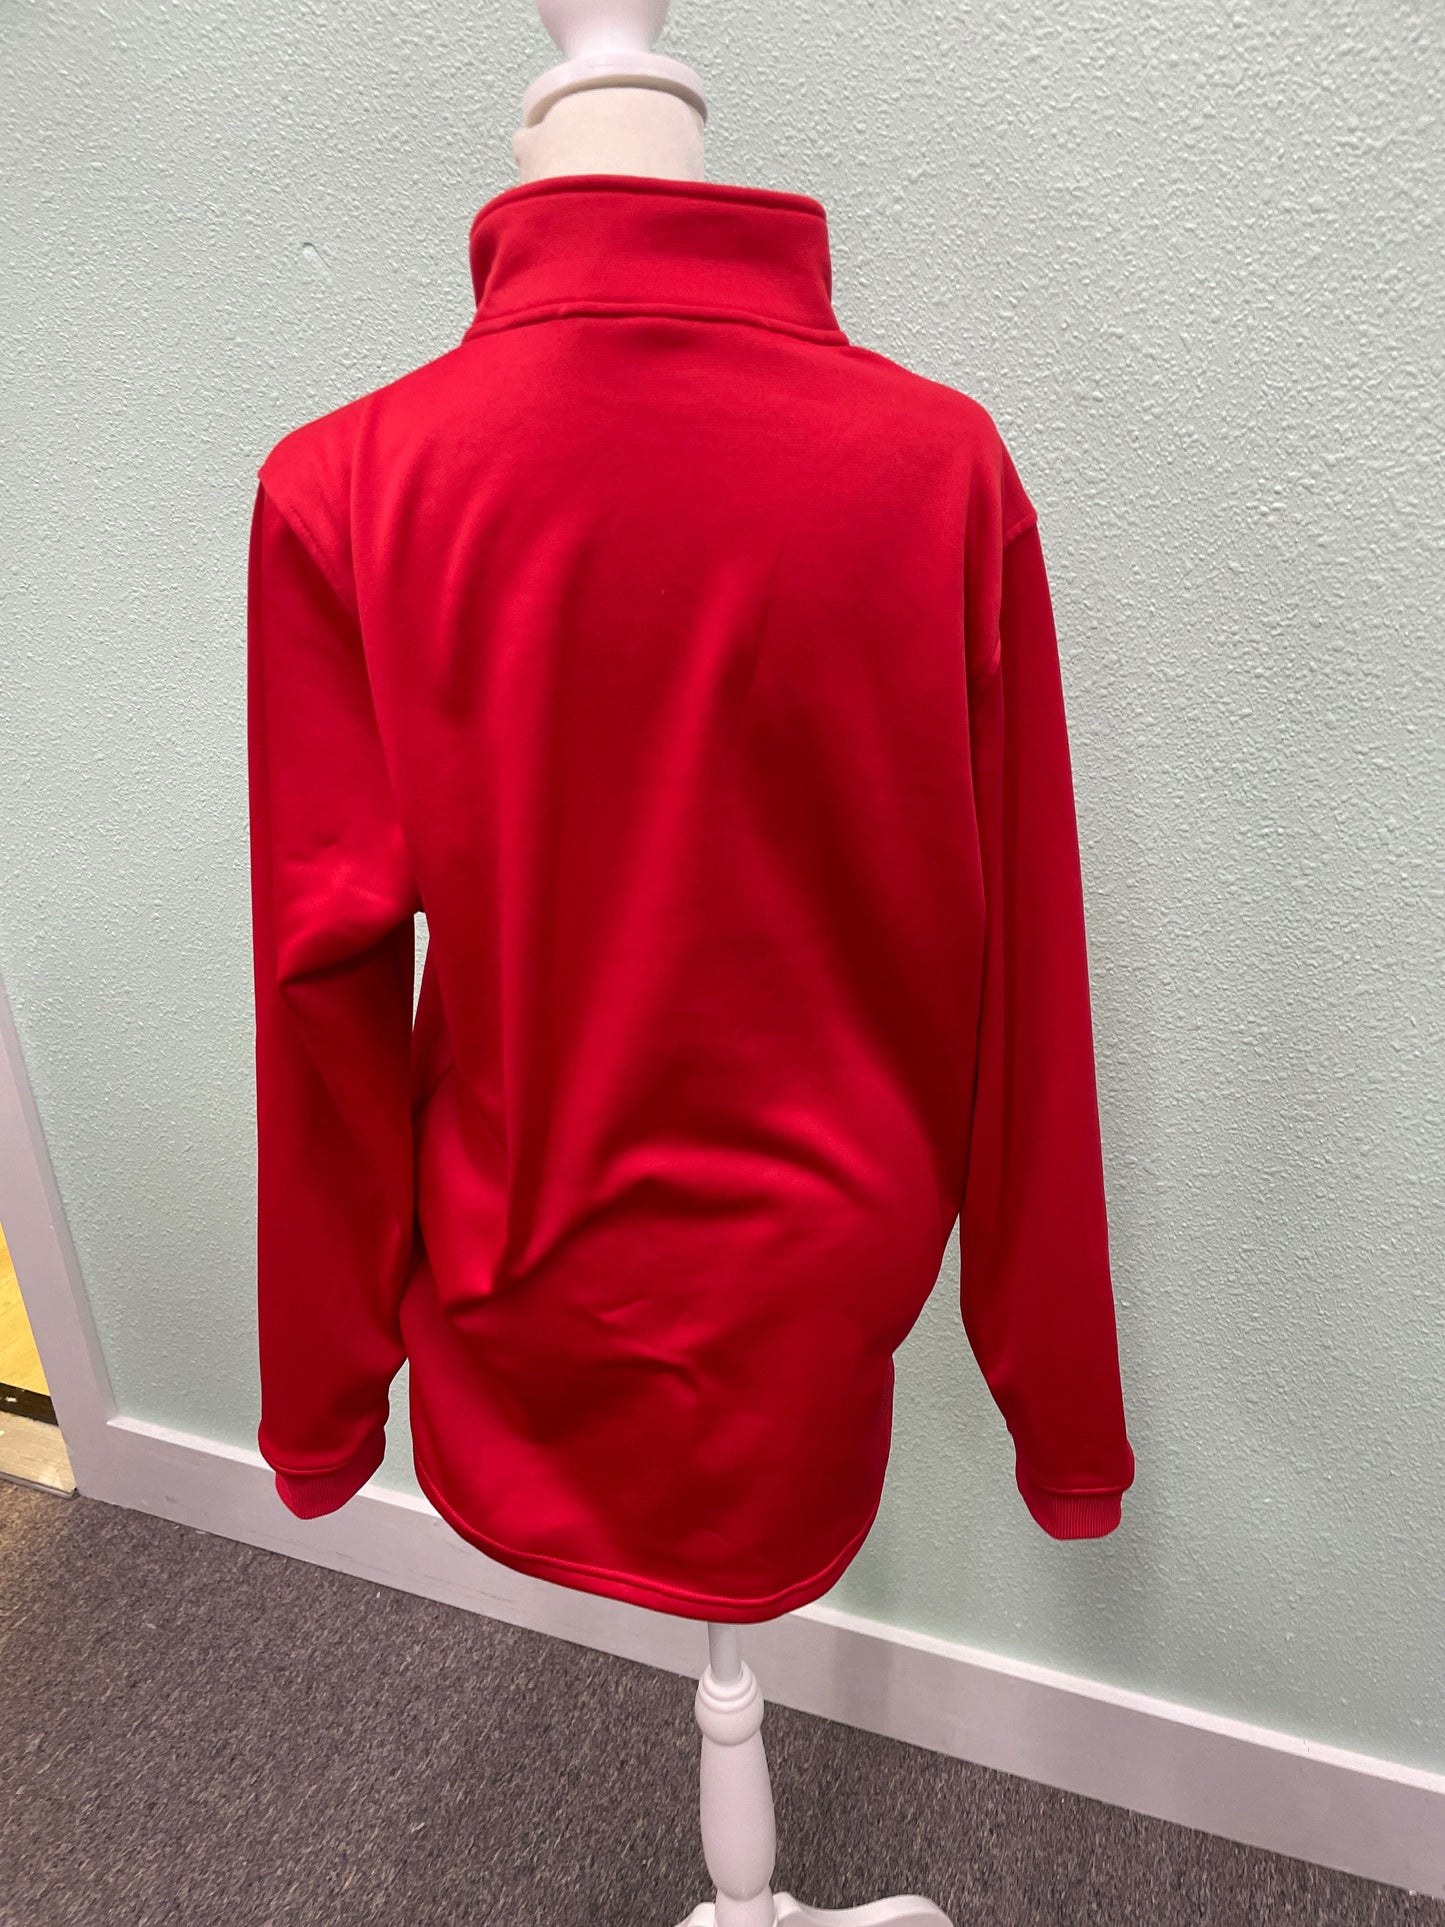 Under Armor 1/4 Zip Red Jacket Pullover Loose Fit Size S Long Sleeve 5A